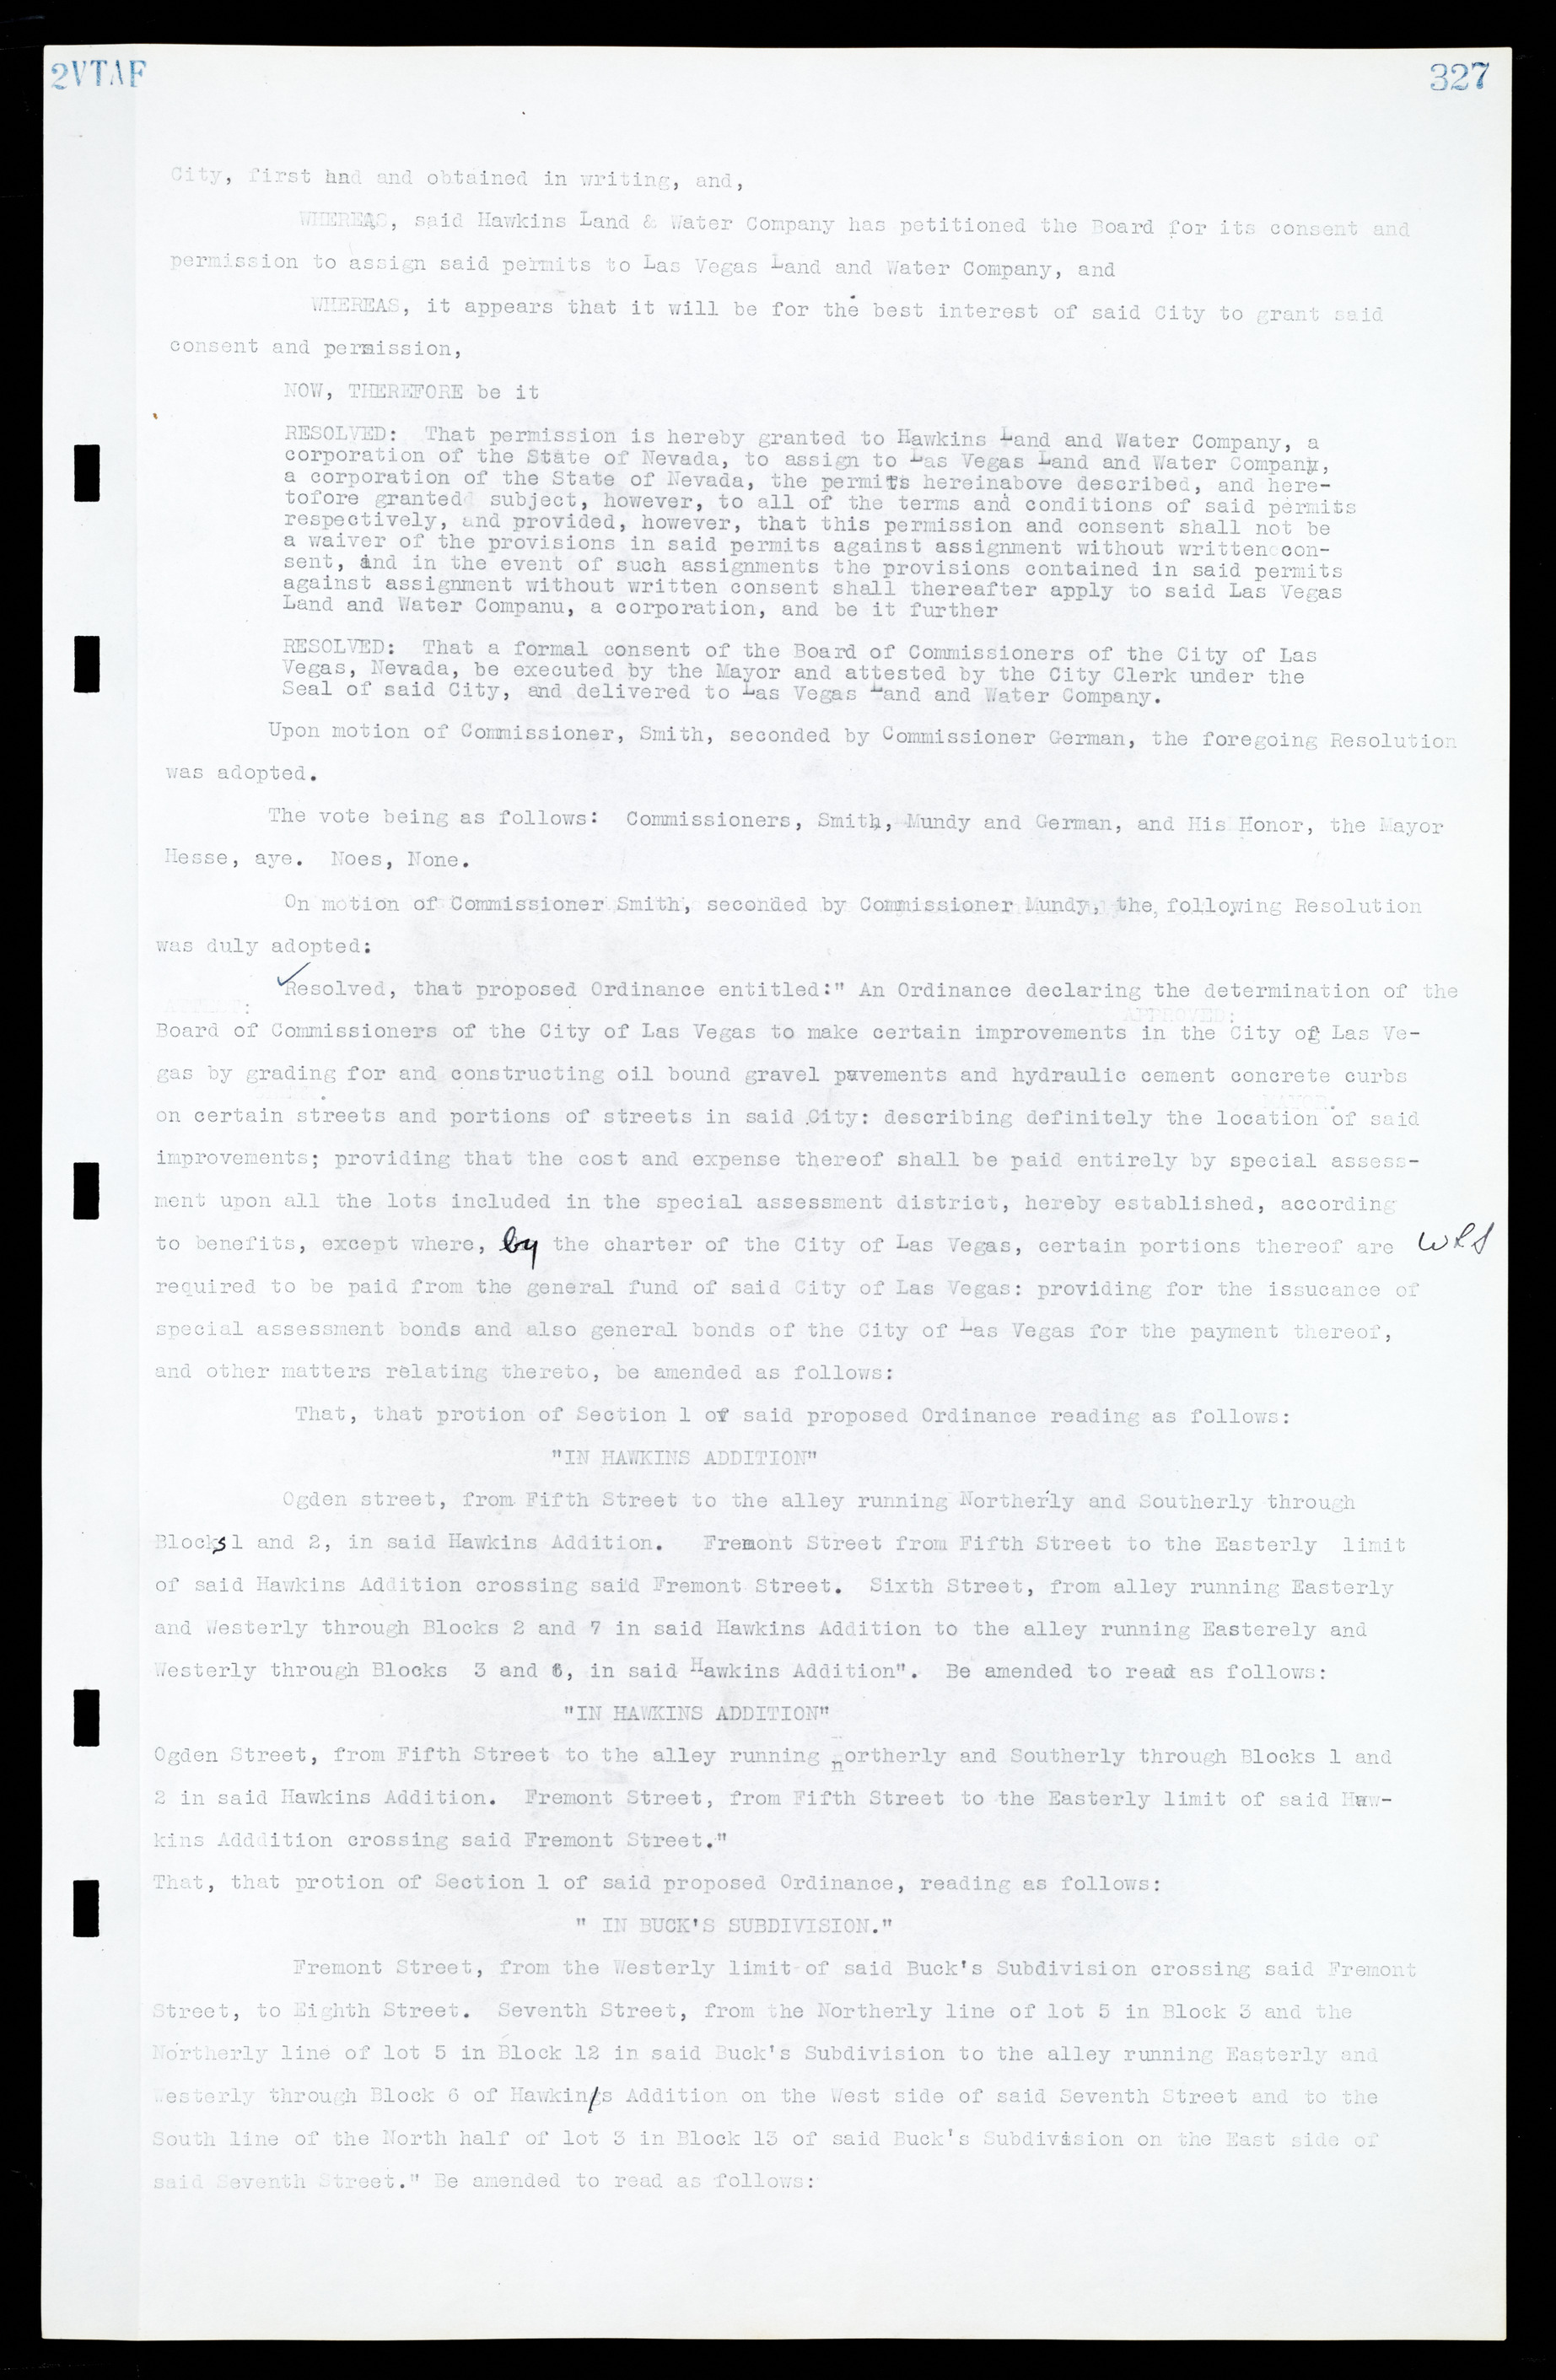 Las Vegas City Commission Minutes, March 1, 1922 to May 10, 1929, lvc000002-336